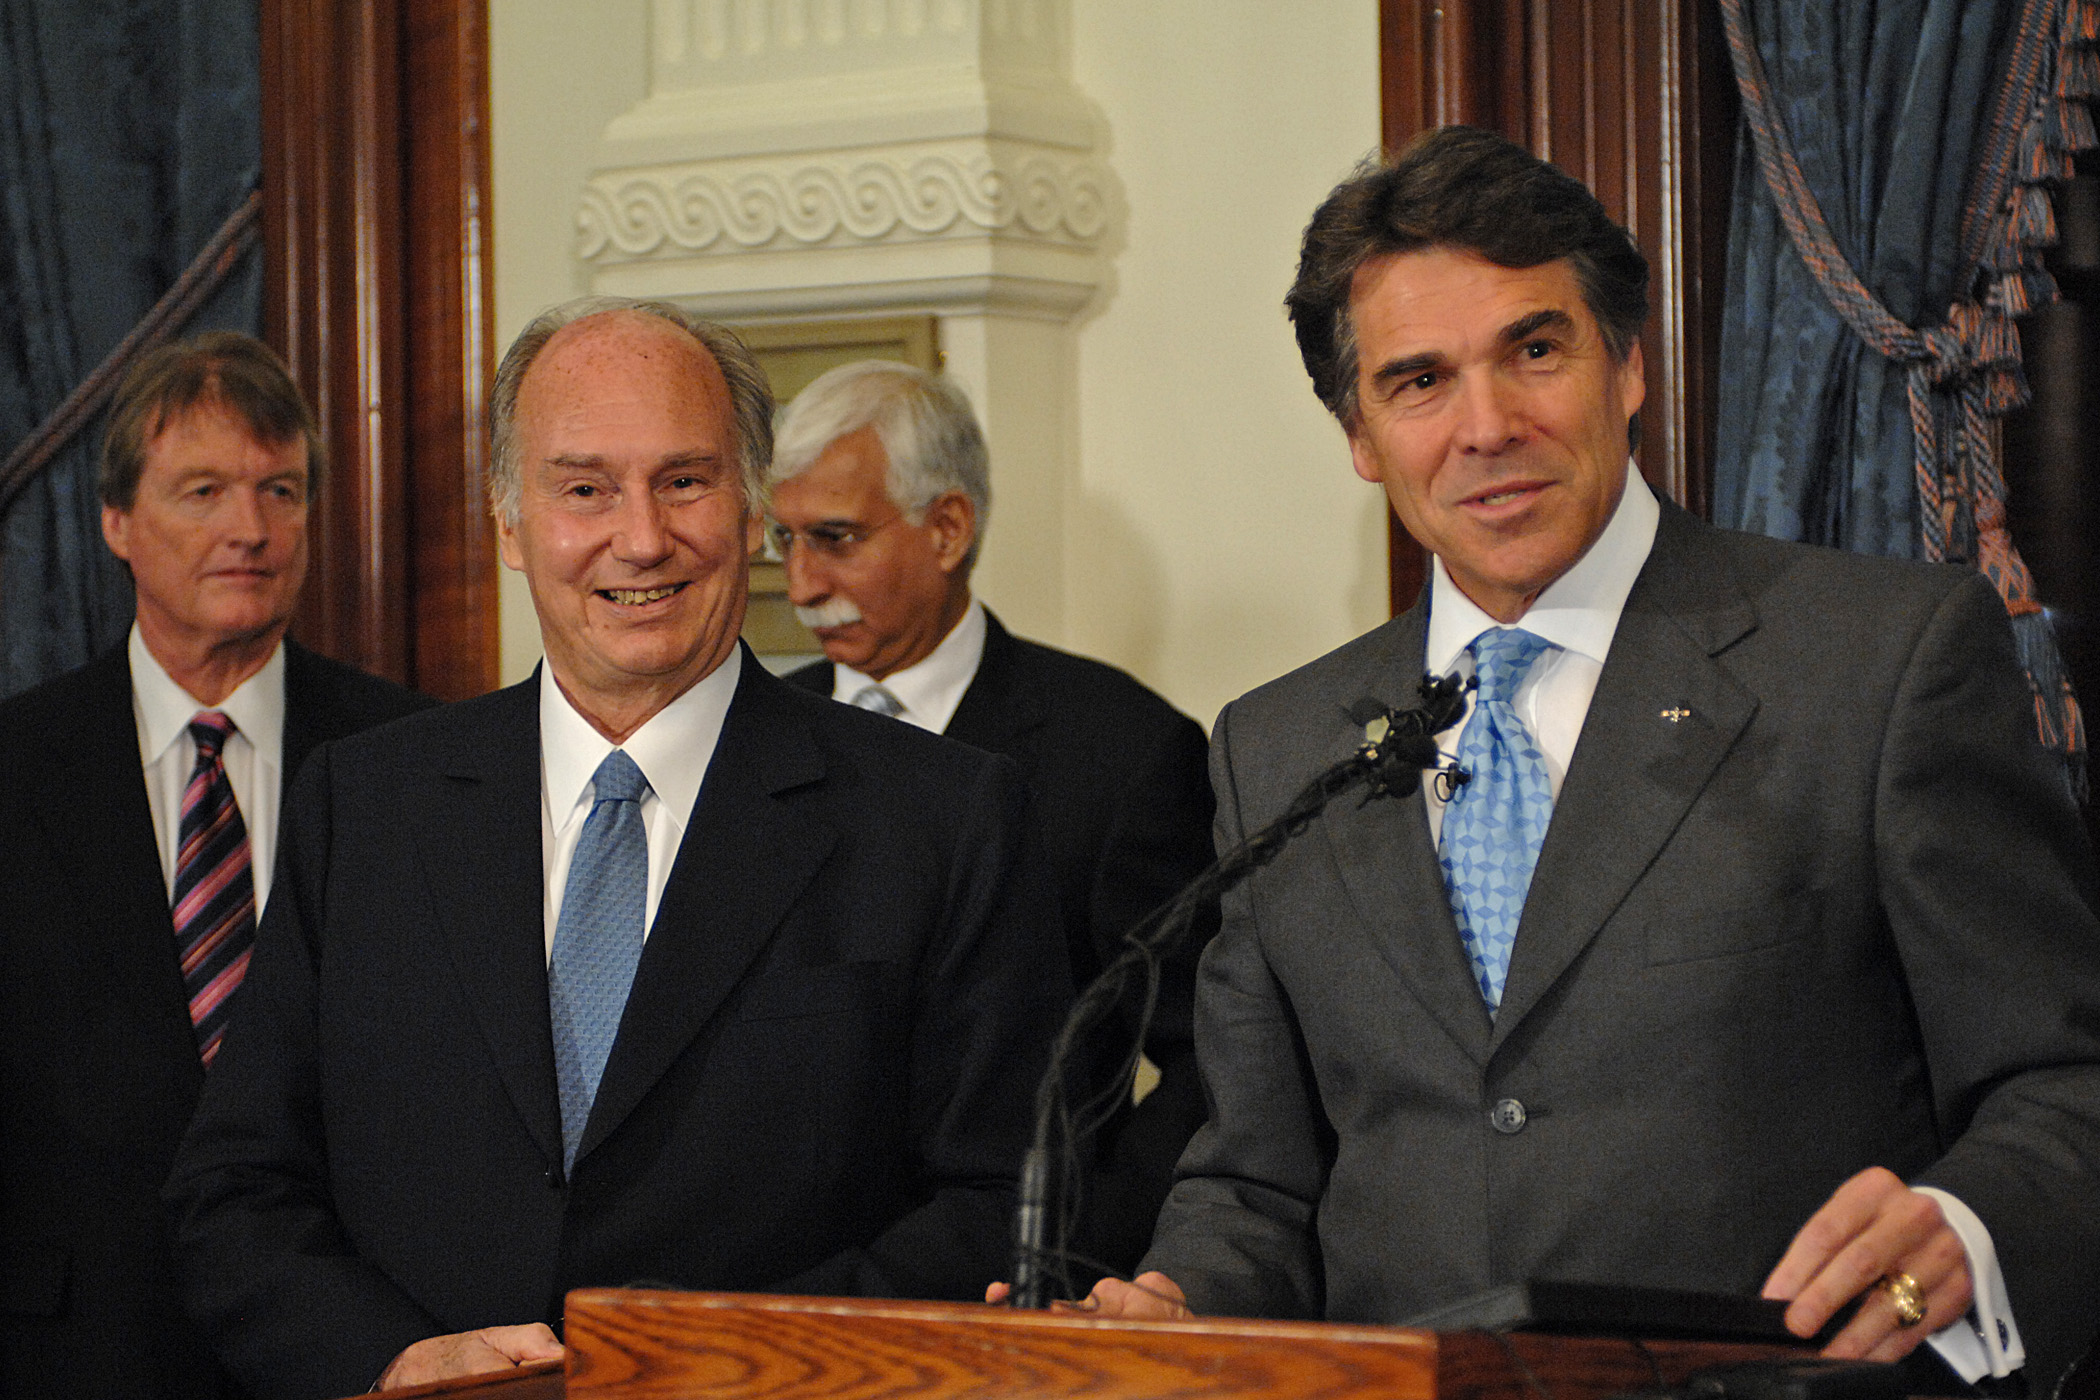 Governor Rick Perry of Texas addressing the media prior to the signing of the Memorandum of Understanding between the University of Texas and the Aga Khan University as Mawlana Hazar Imam looks on. Photo: Zahur Ramji